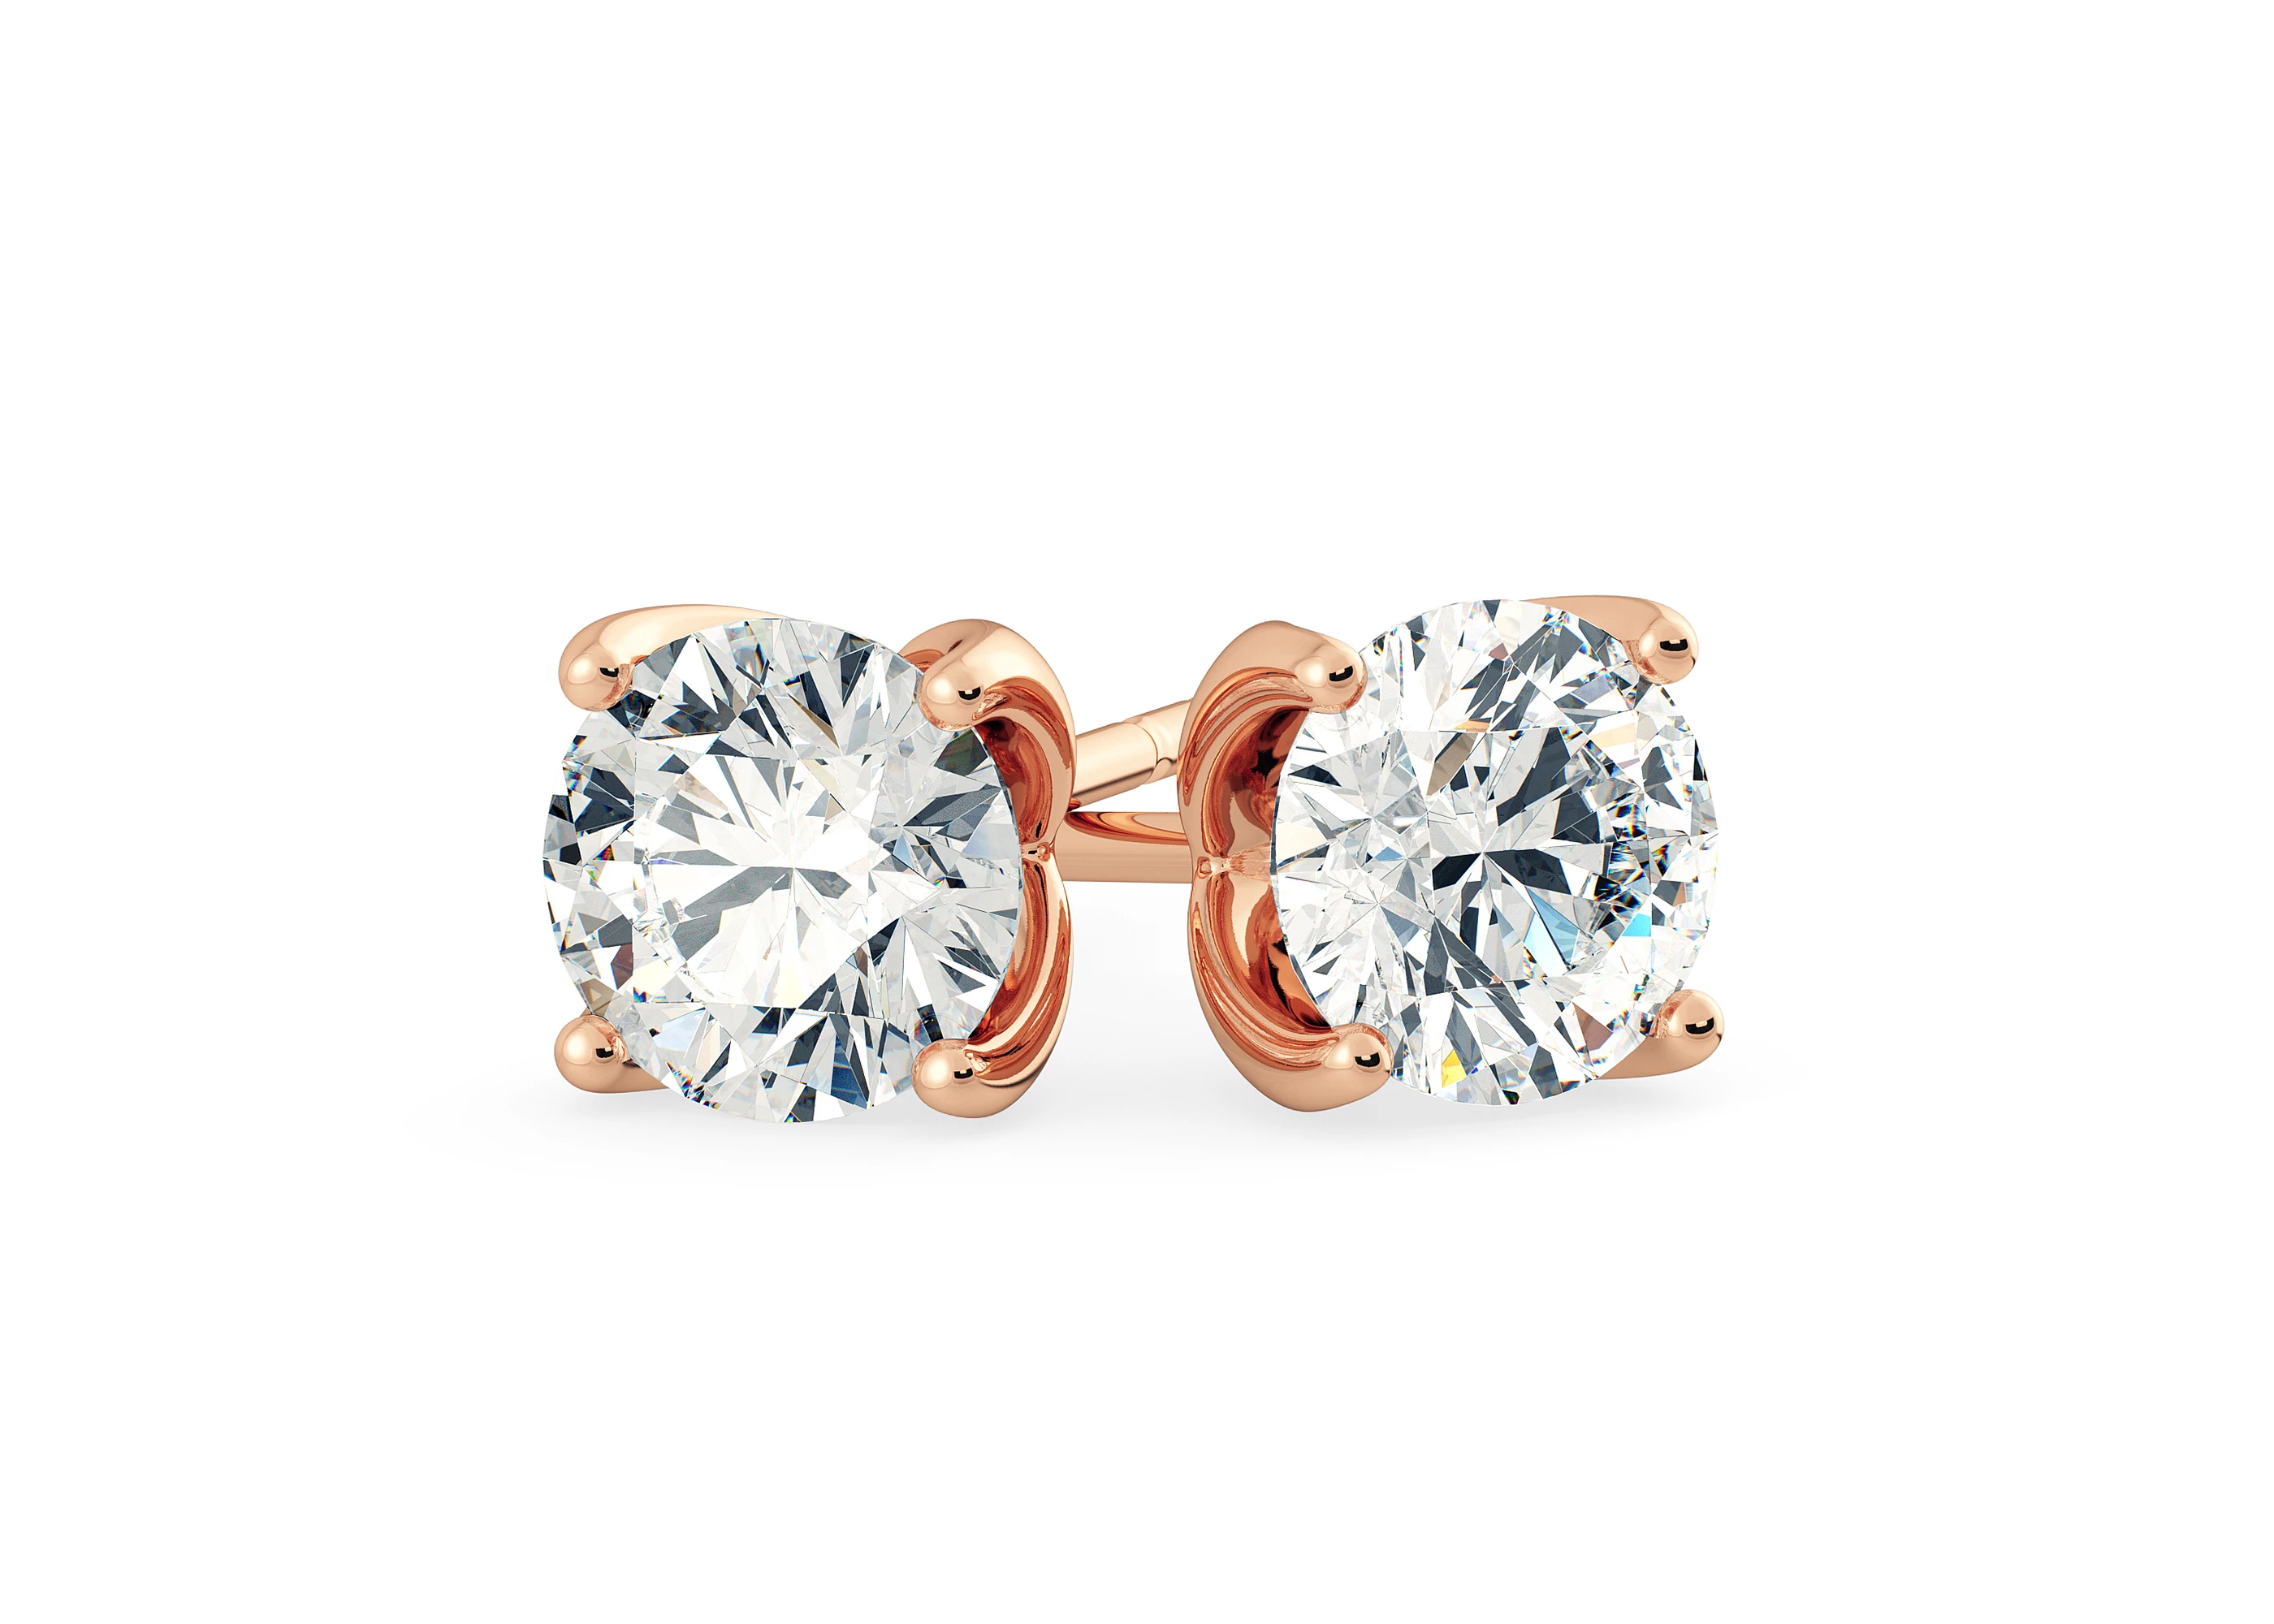 Mirabelle Round Brilliant Diamond Stud Earrings in 18K Rose Gold with Butterfly Backs